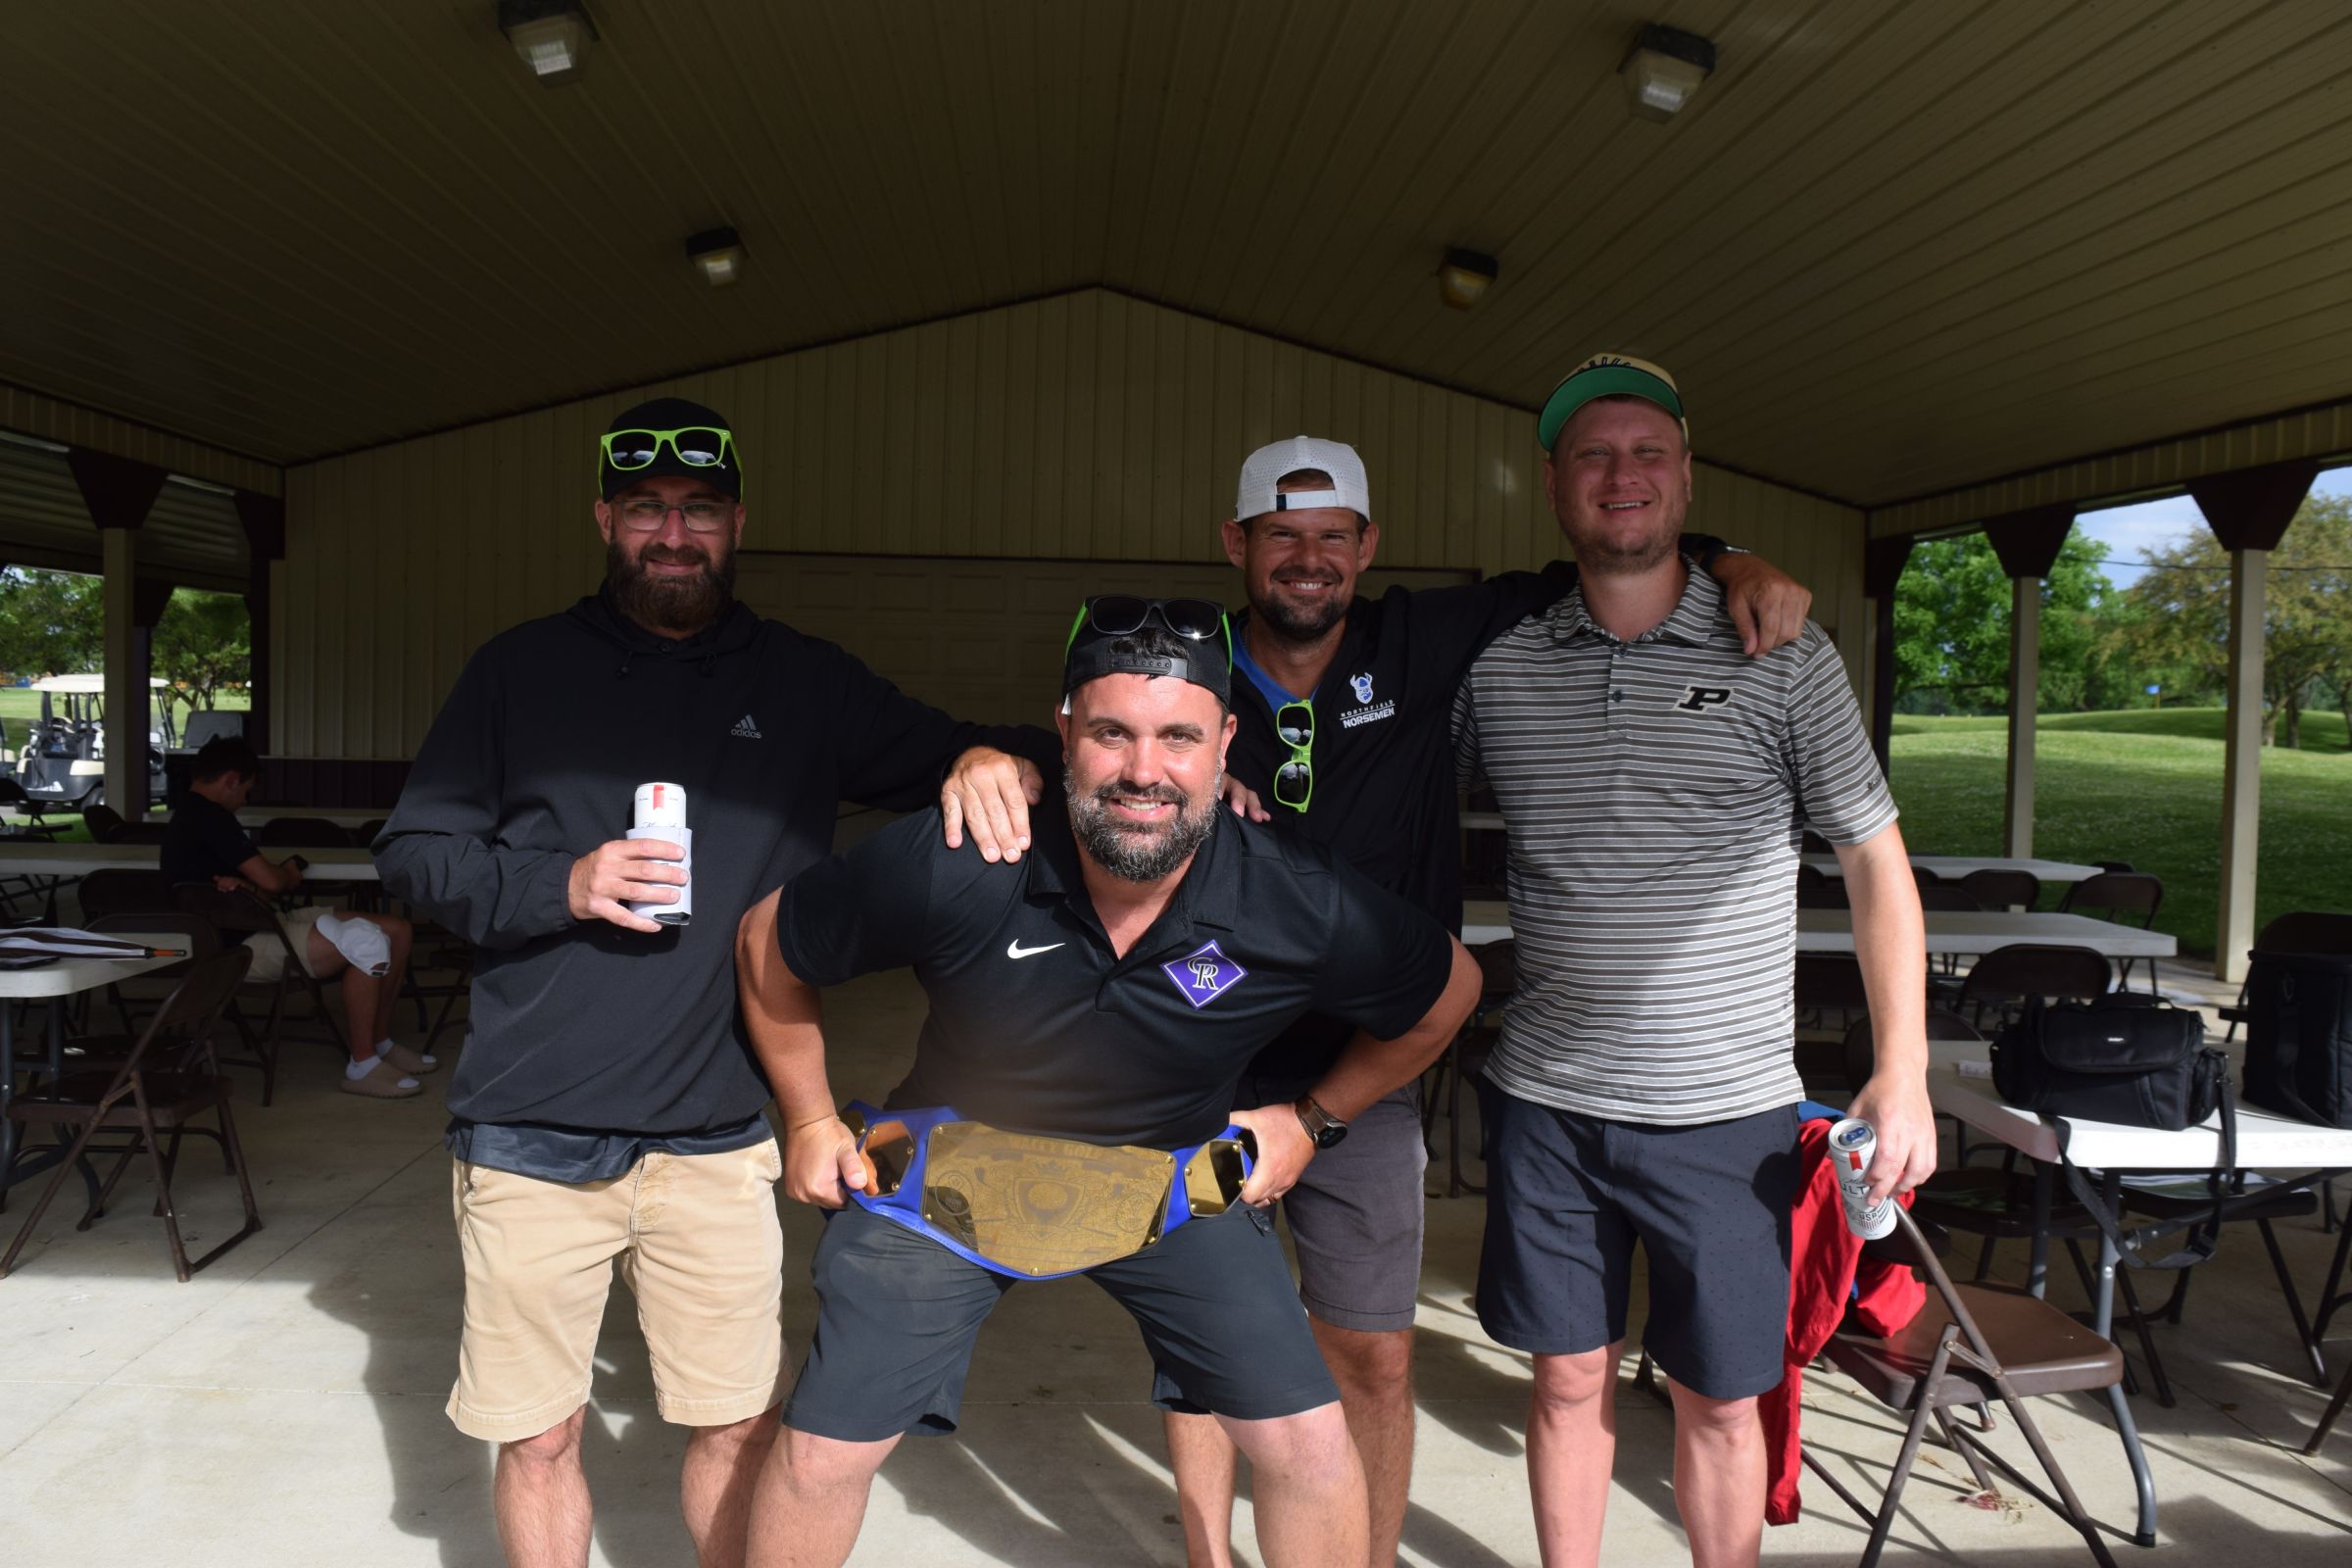 Click the Grow Wabash County hosts annual WACCY Golf Outing slide photo to open